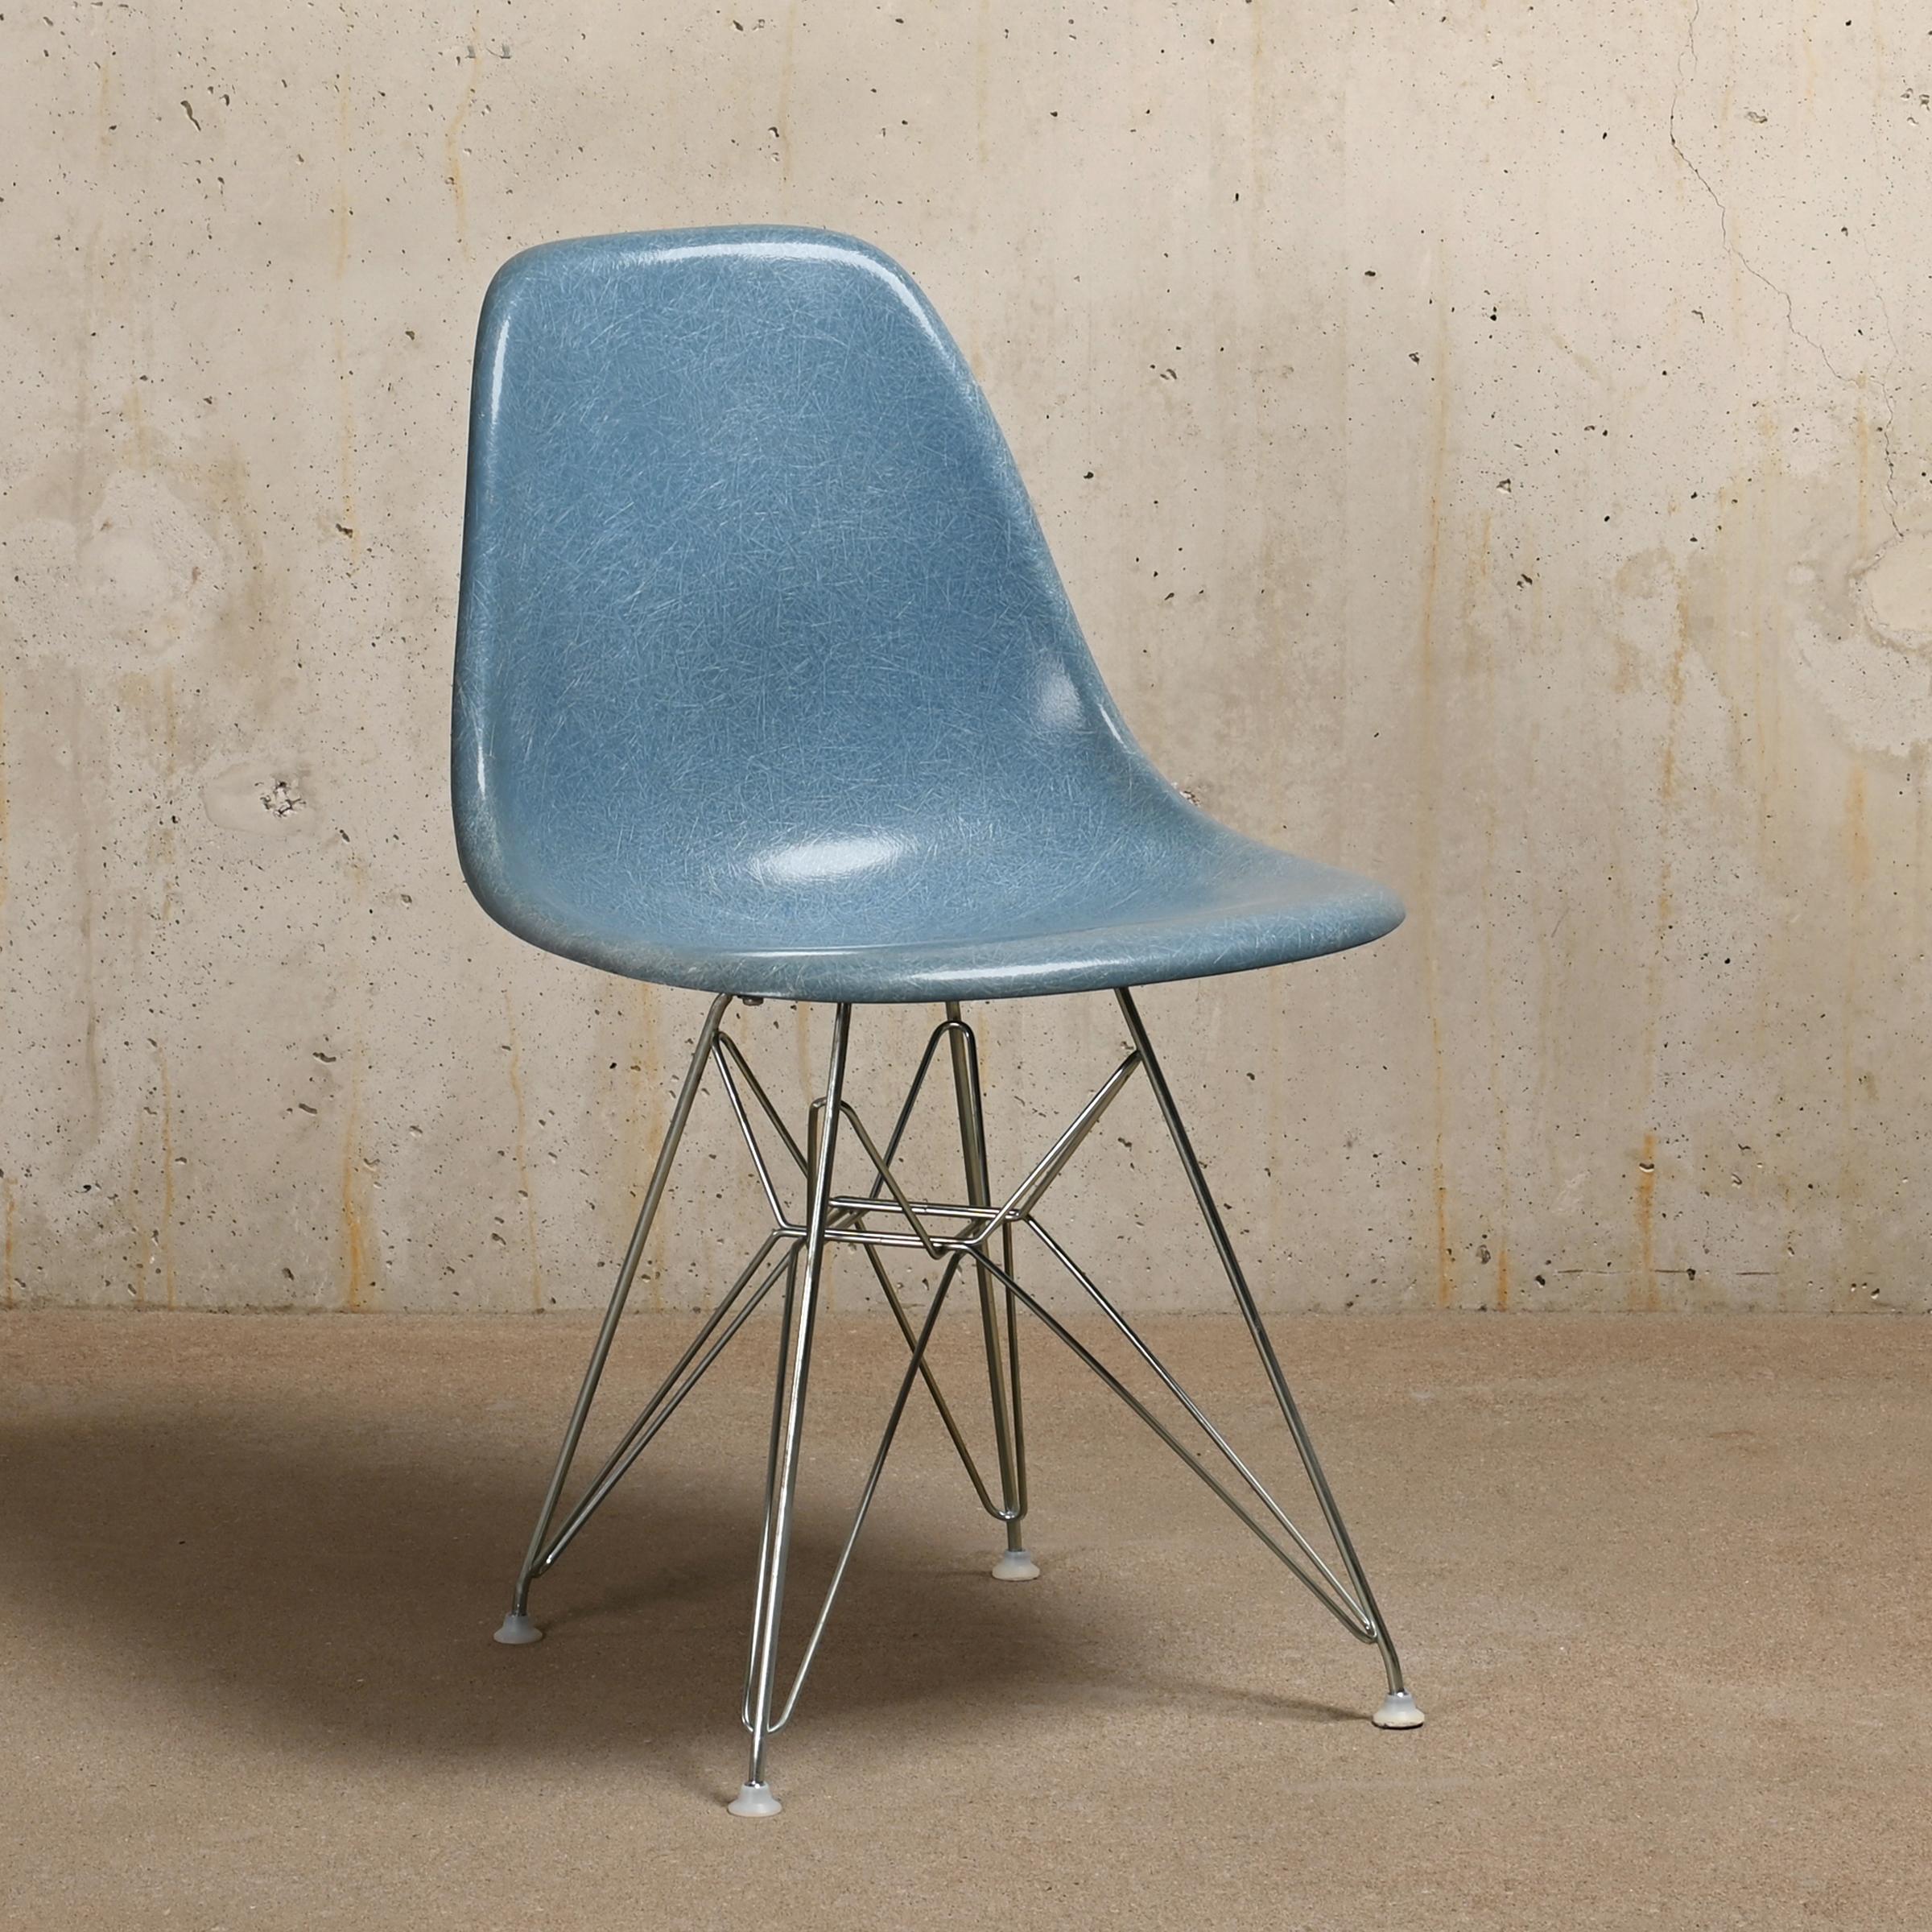 Iconic DSR (dining side chair rod base) chair designed by Charles and Ray Eames for Vitra / Herman Miller. Molded fiberglass shell in the rare colour Ocean Blue. Assembled on an original zinc plated Eiffel base. The chair is in very good vintage